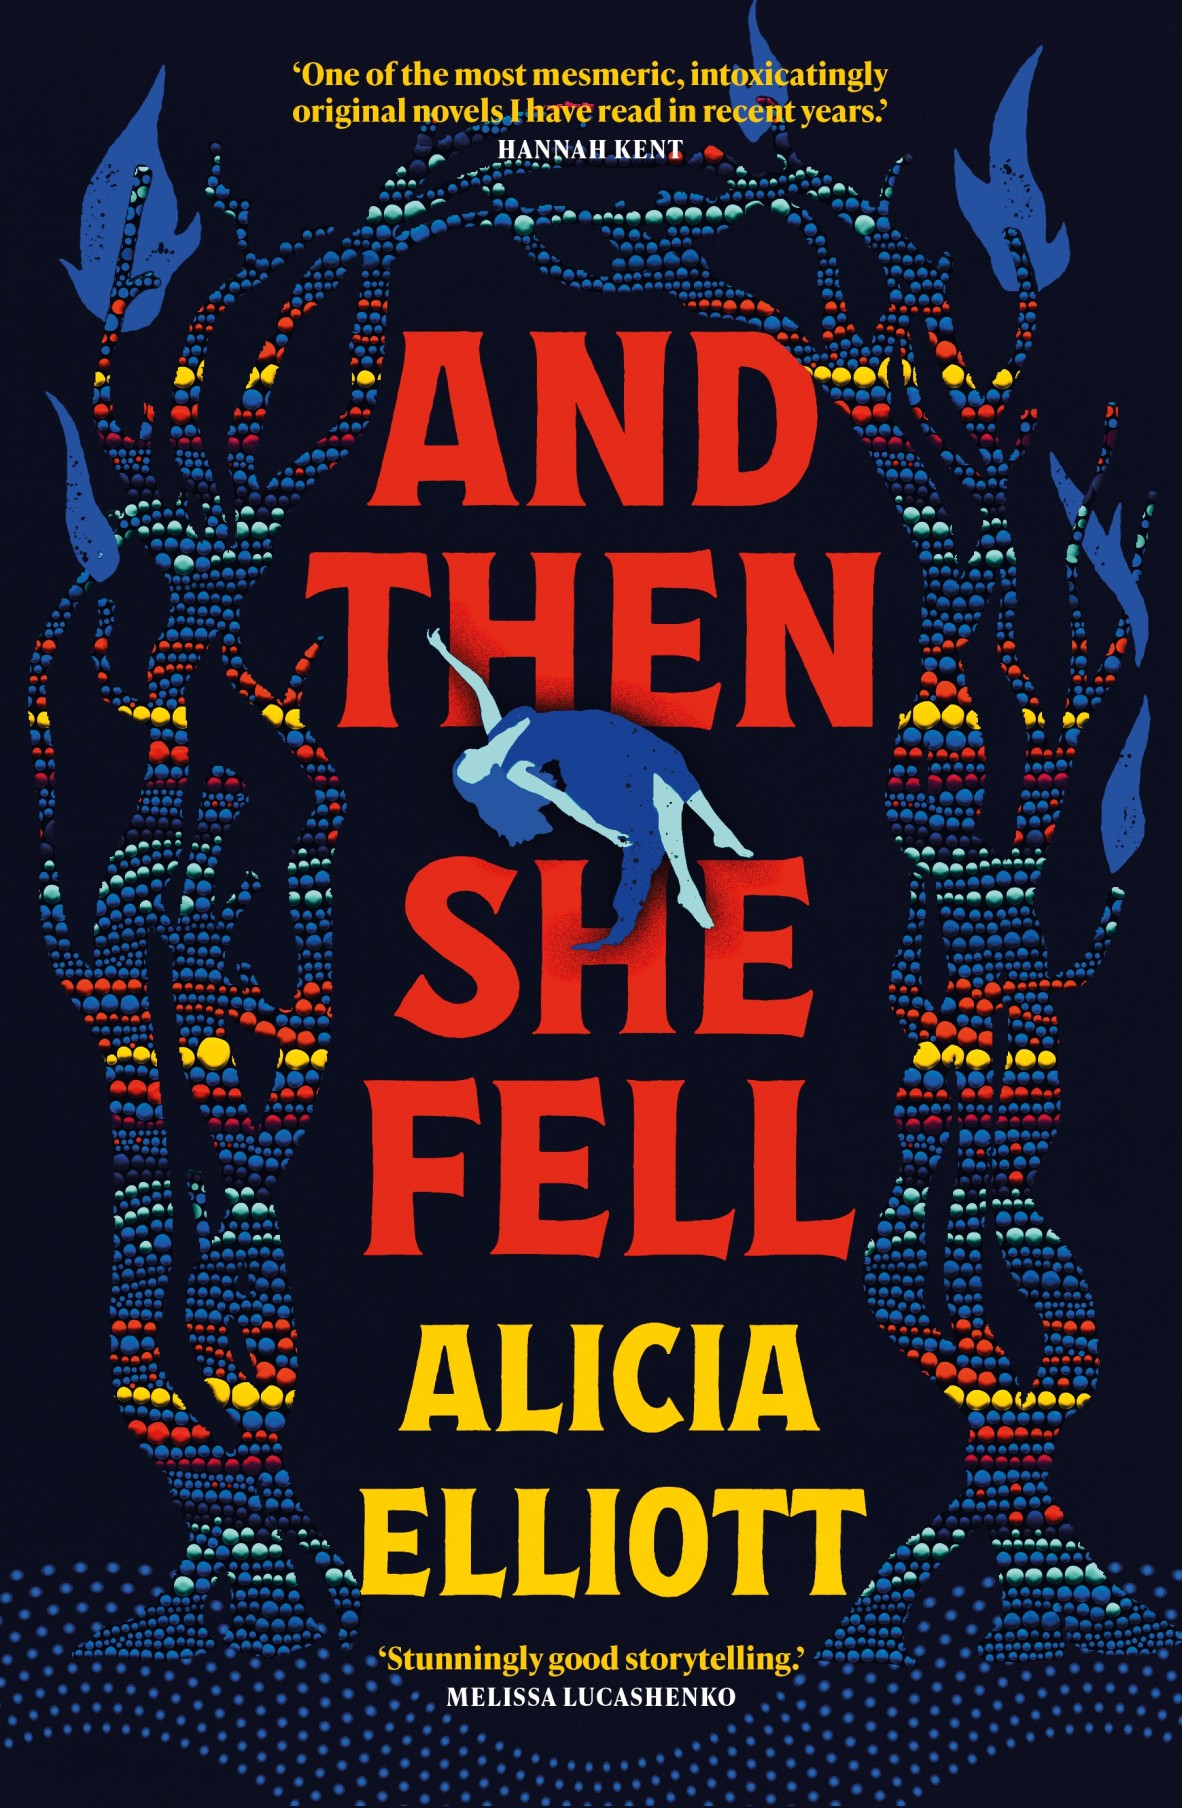 And Then She Fell by Alicia Elliott. The cover shows stylised plants in blue, yellow and red dots, with a silhouette of a woman falling.